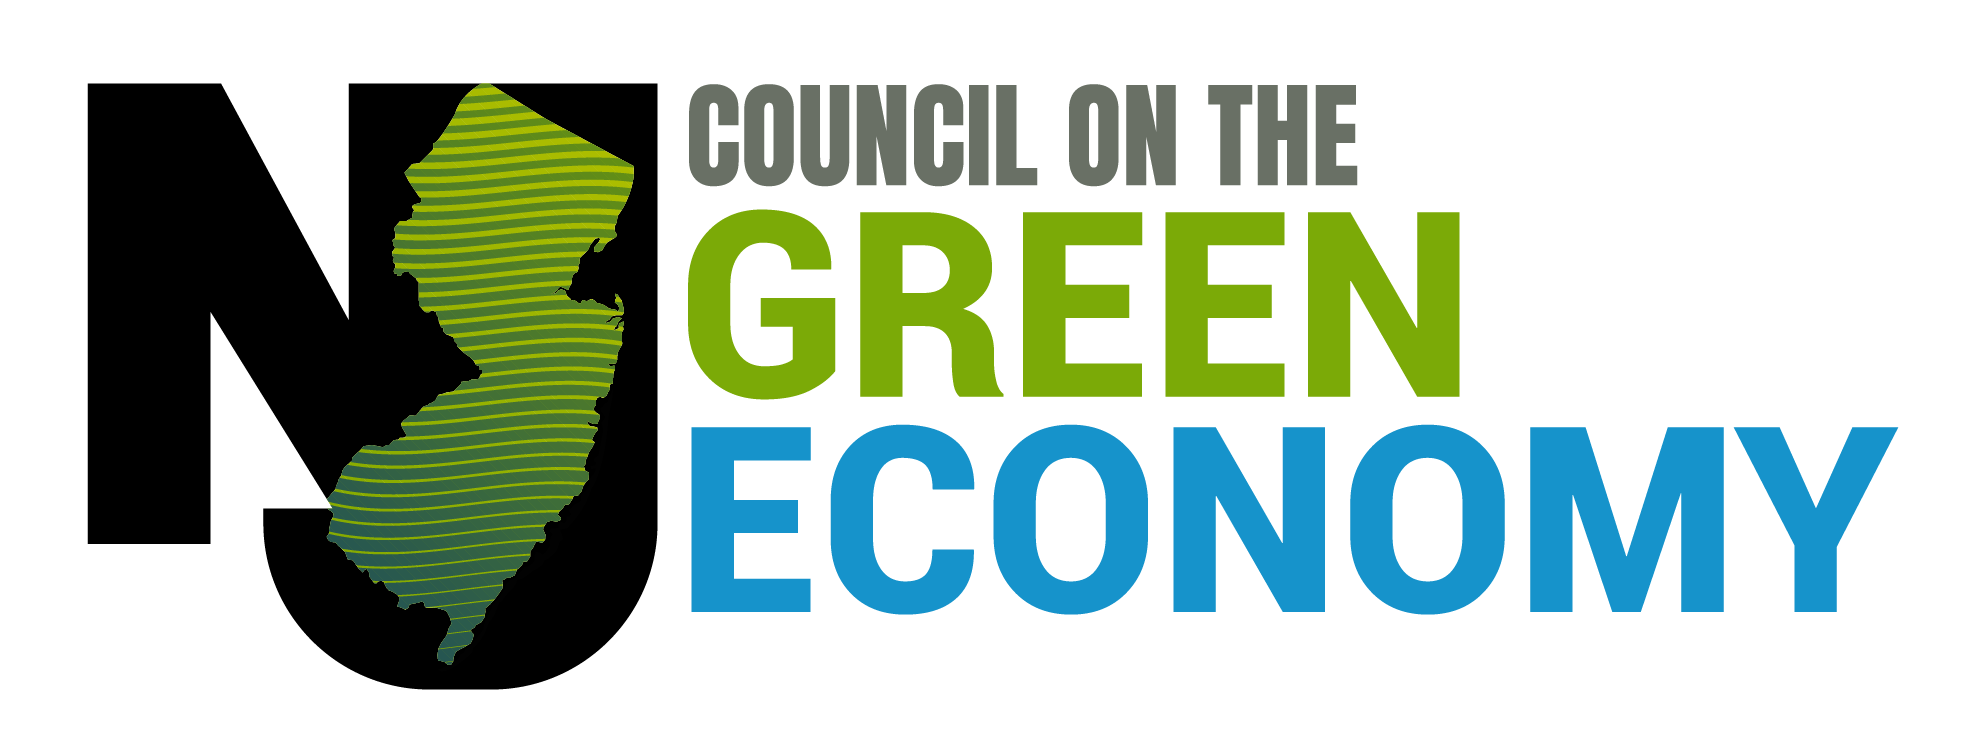 Council on the Green Economy Logo